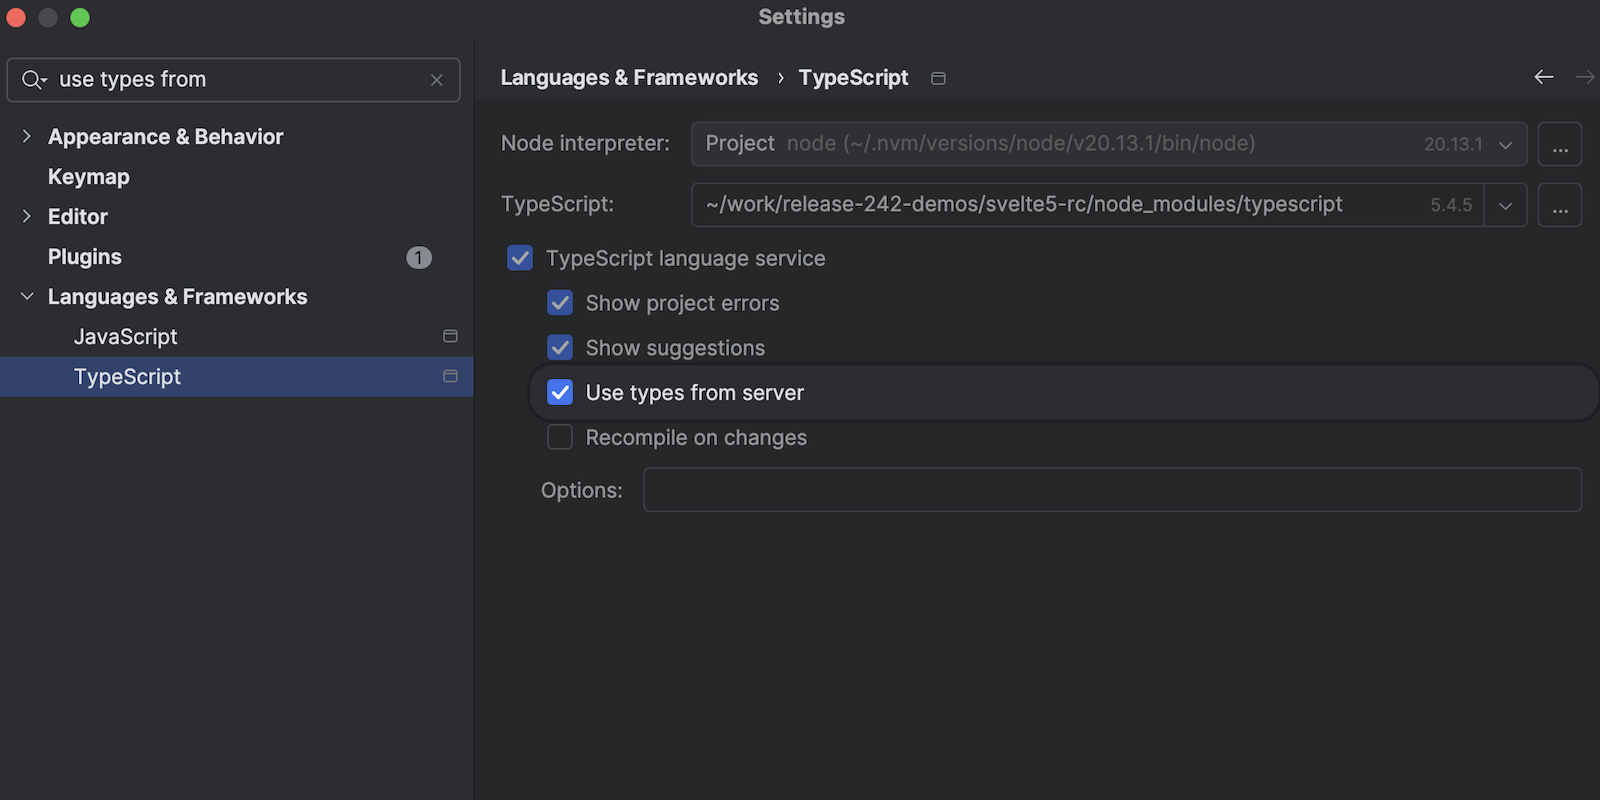 Showing the settings option for turning on the new TypeScript engine in Settings | Languages & Frameworks | TypeScript > Use types from server